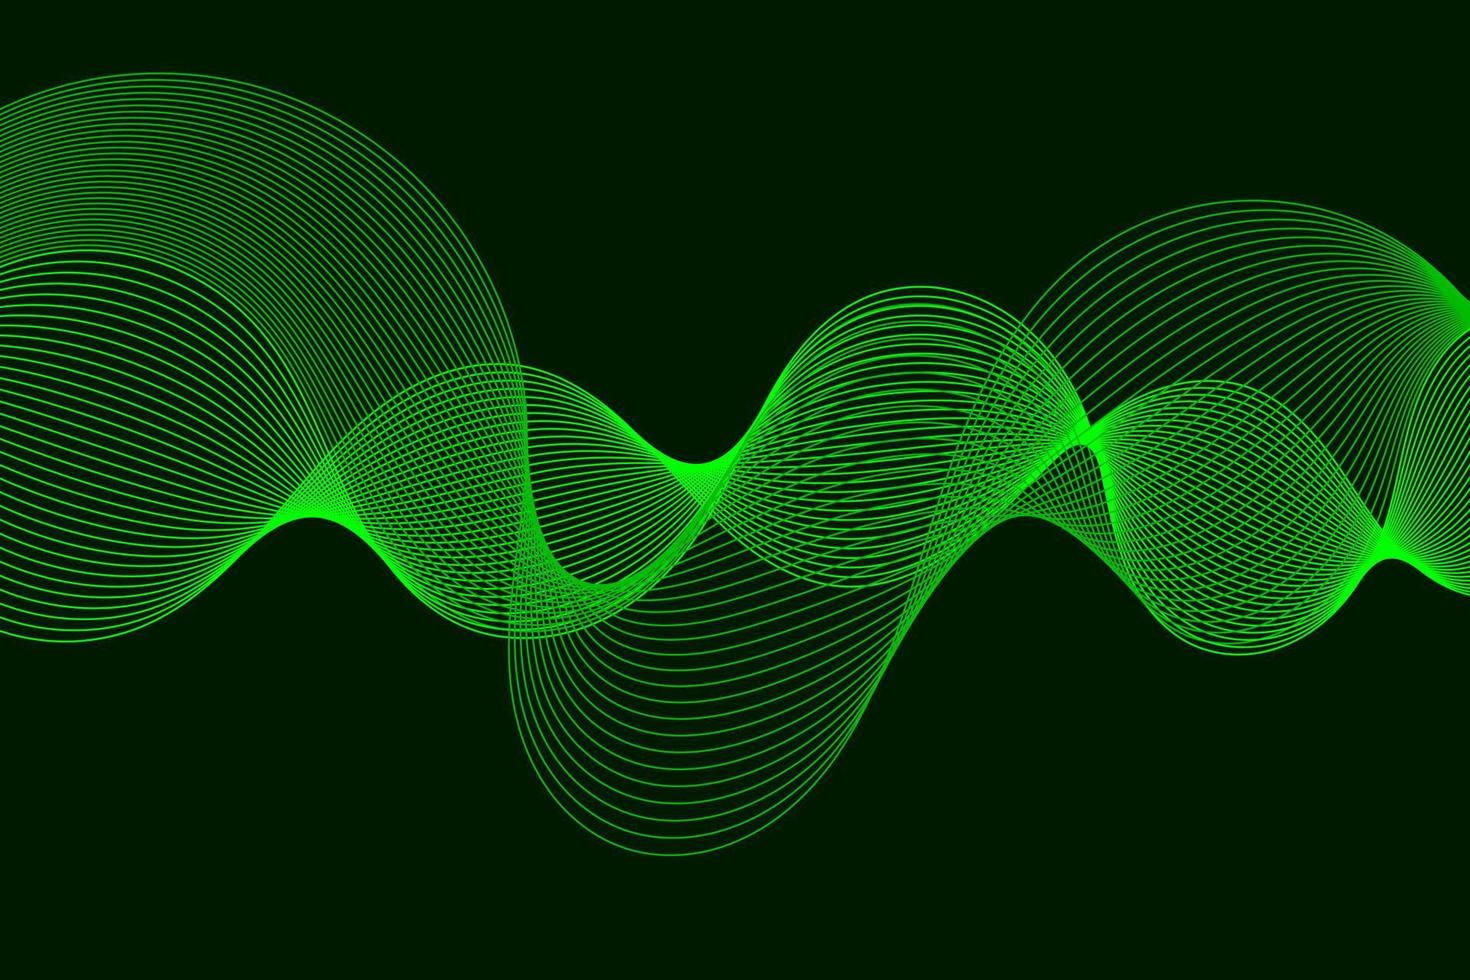 Abstract wave element for design. Digital frequency track equalizer vector